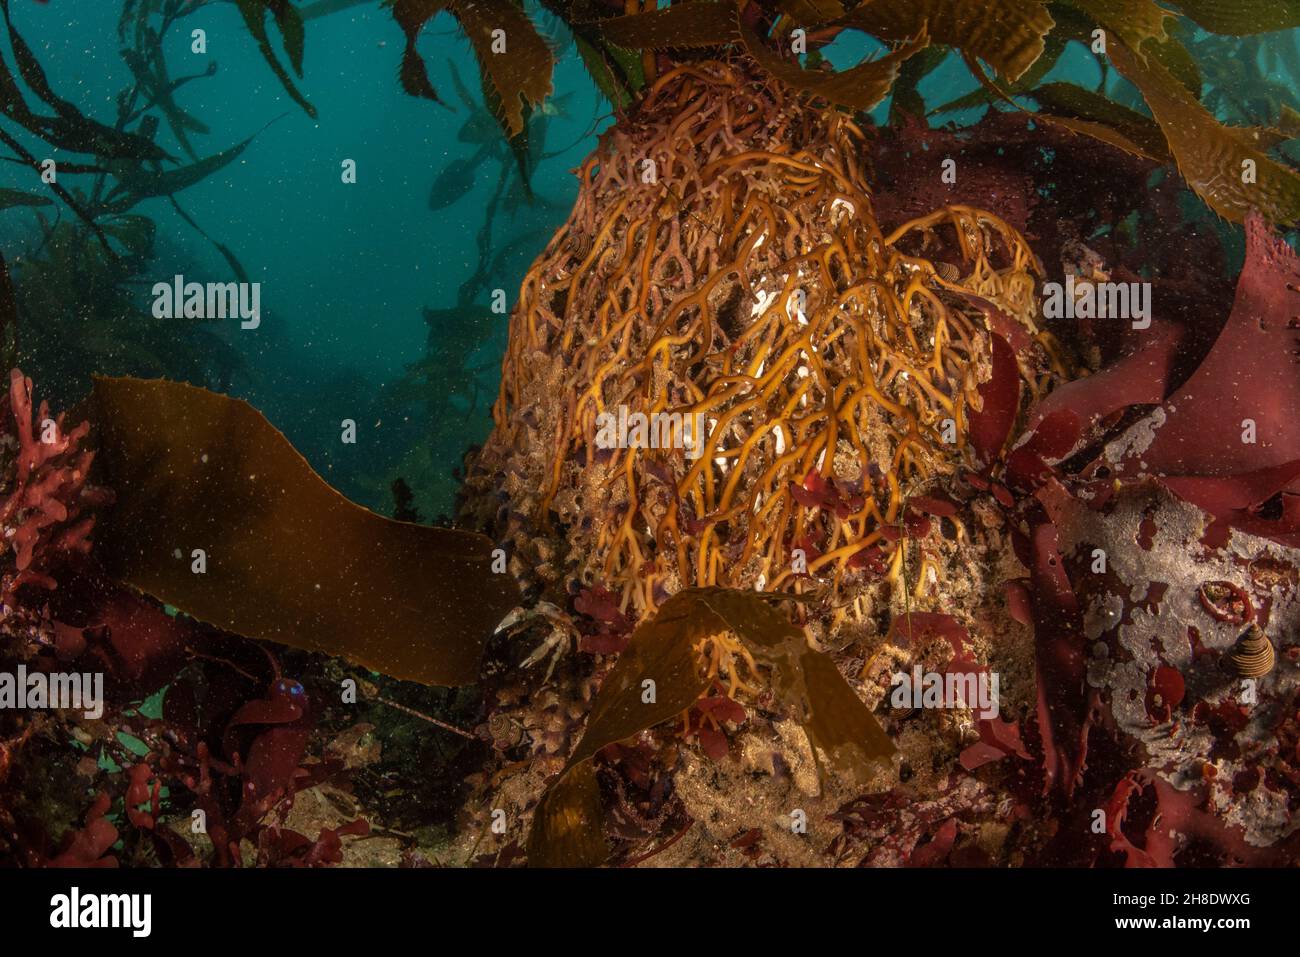 The holdfast of giant kelp (Macrocystis pyrifera) deep underwater in Monterey Bay, California. This is important habitat and a marine ecosystem. Stock Photo